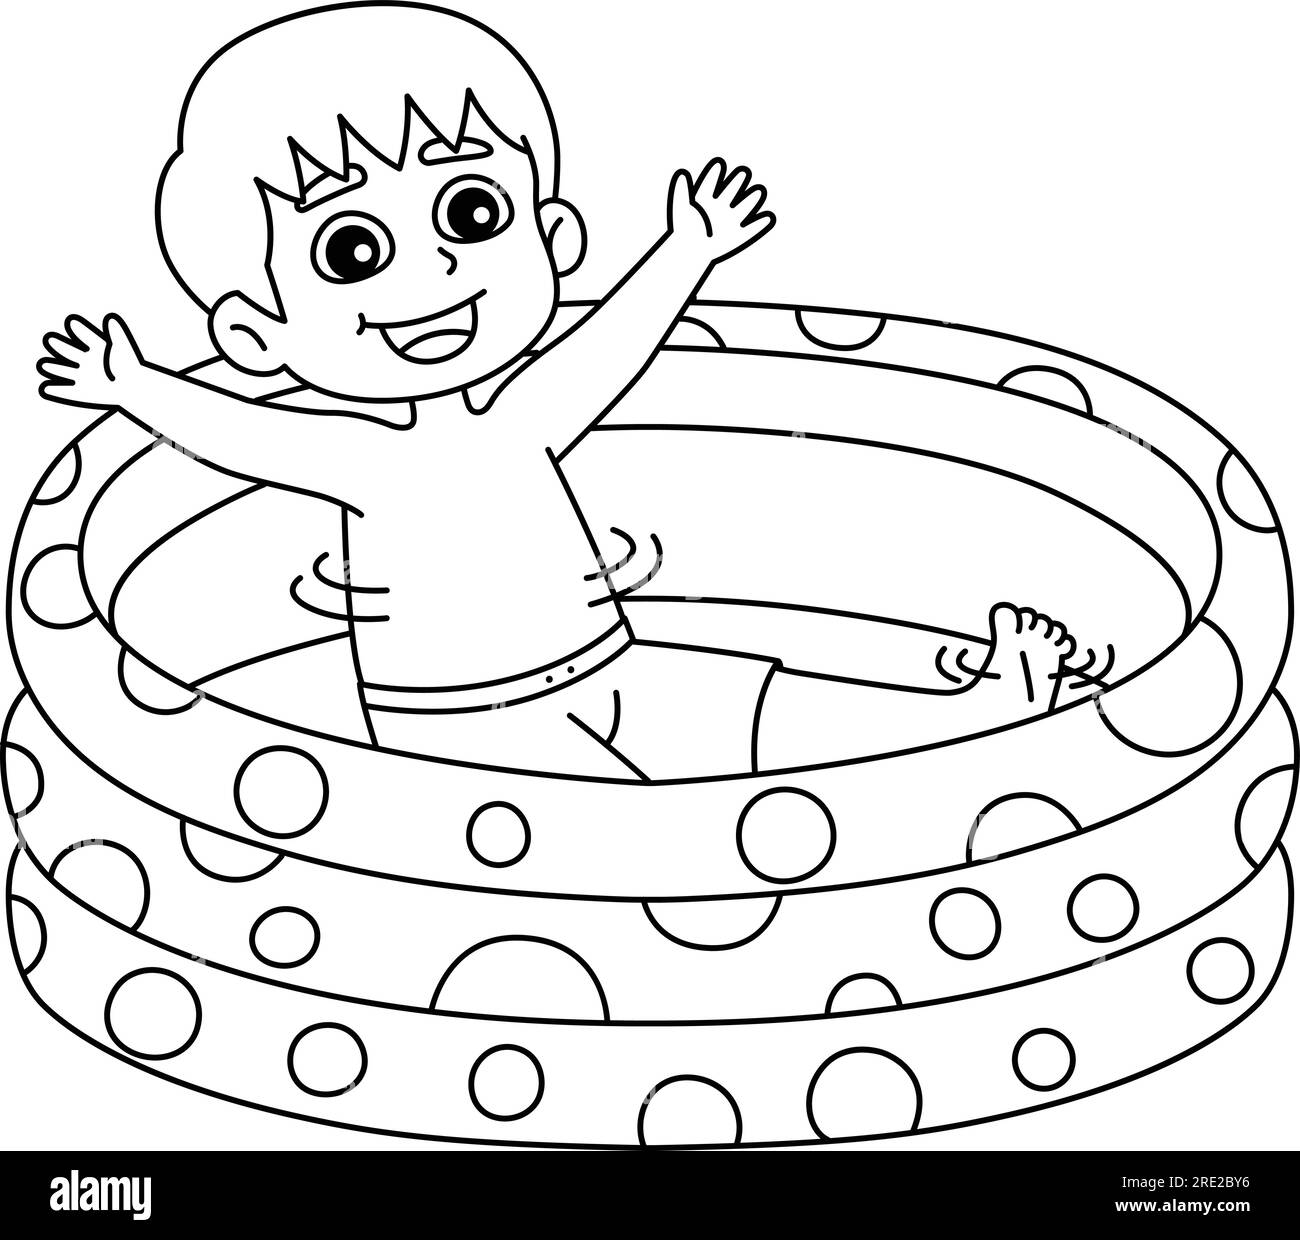 Boy in swimming pool summer isolated coloring page stock vector image art